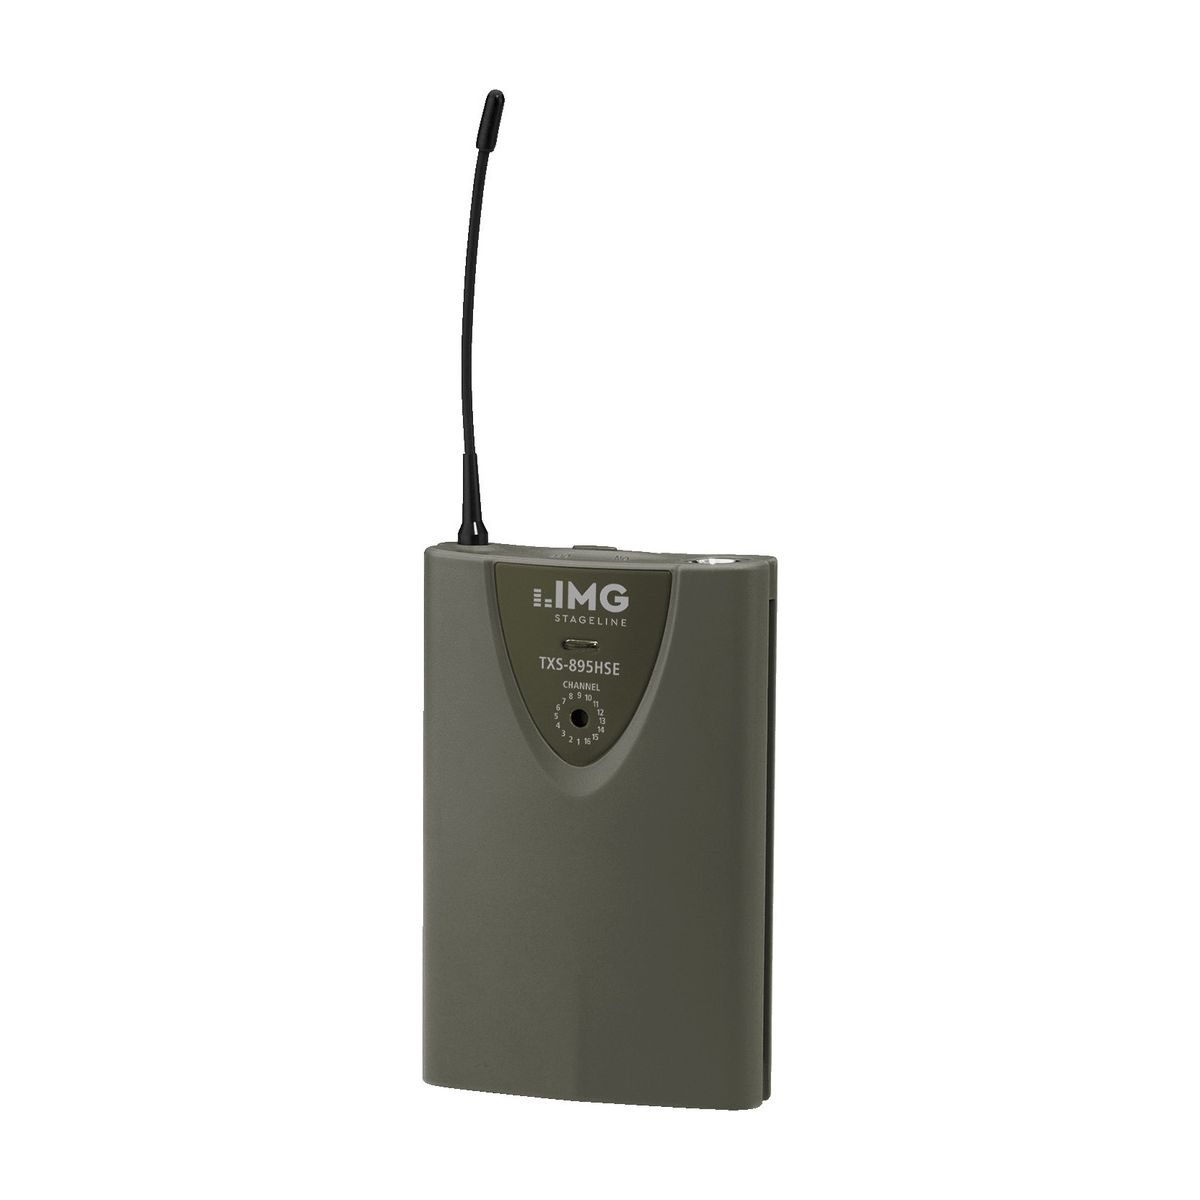 TXS-895HSE | Multifrequency pocket transmitter, 518-542 MHz-0